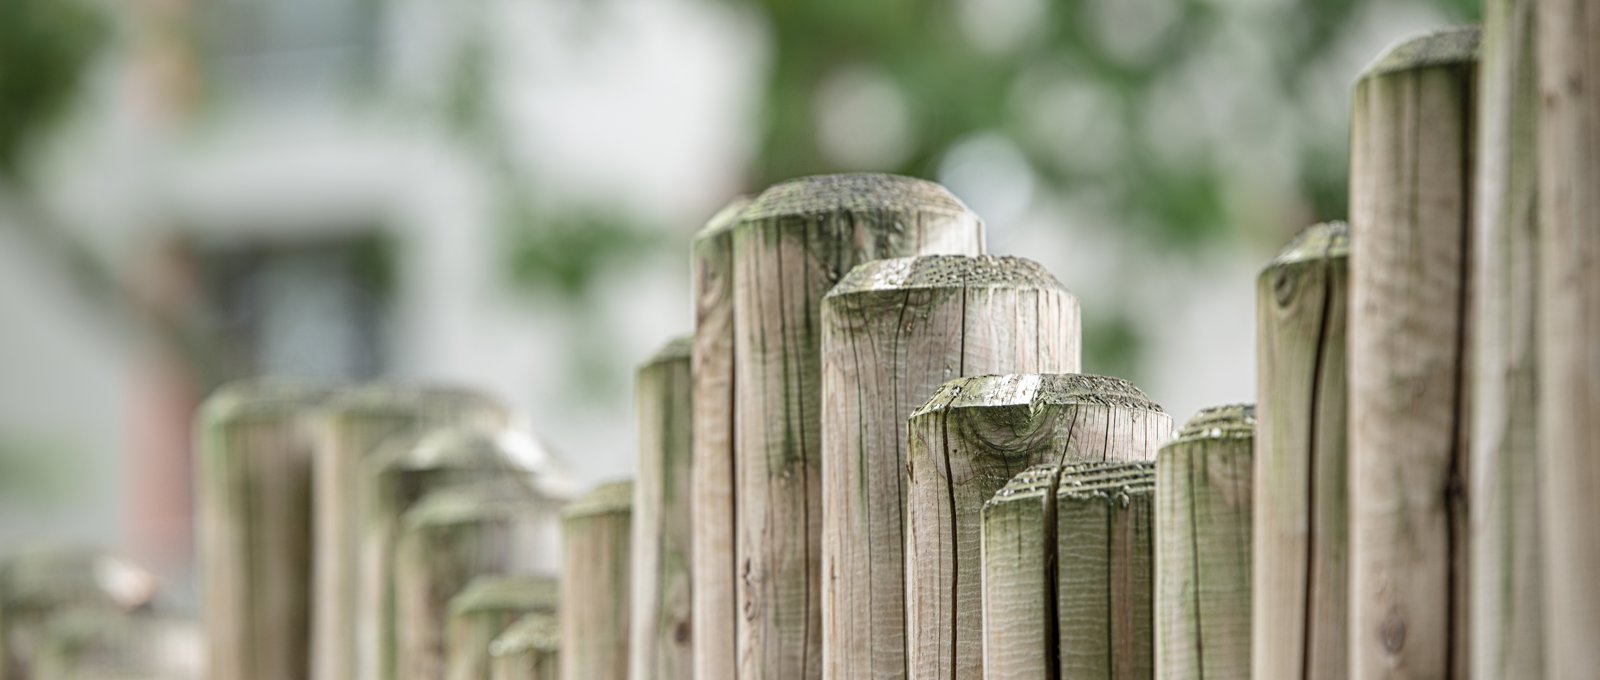 Close up shot of the top of fenceposts, blurring into the distance